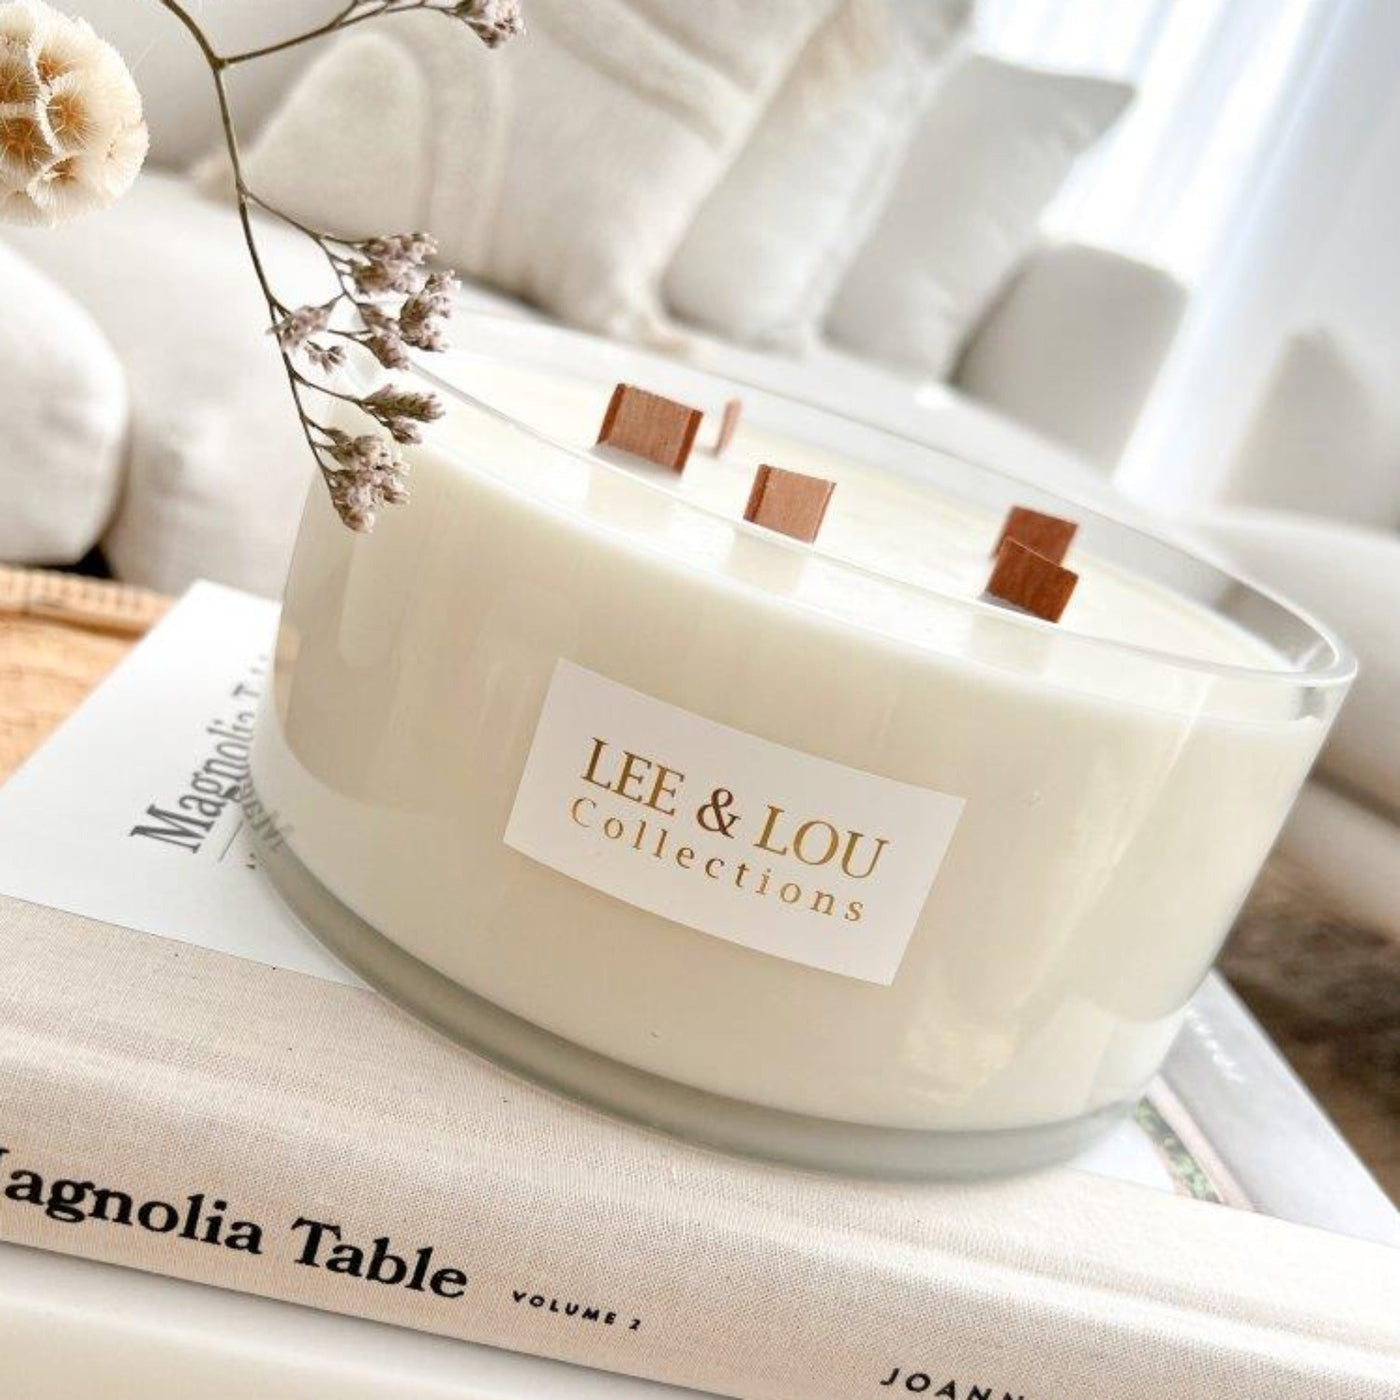 Bowl Candle - Limoncello (NEW)